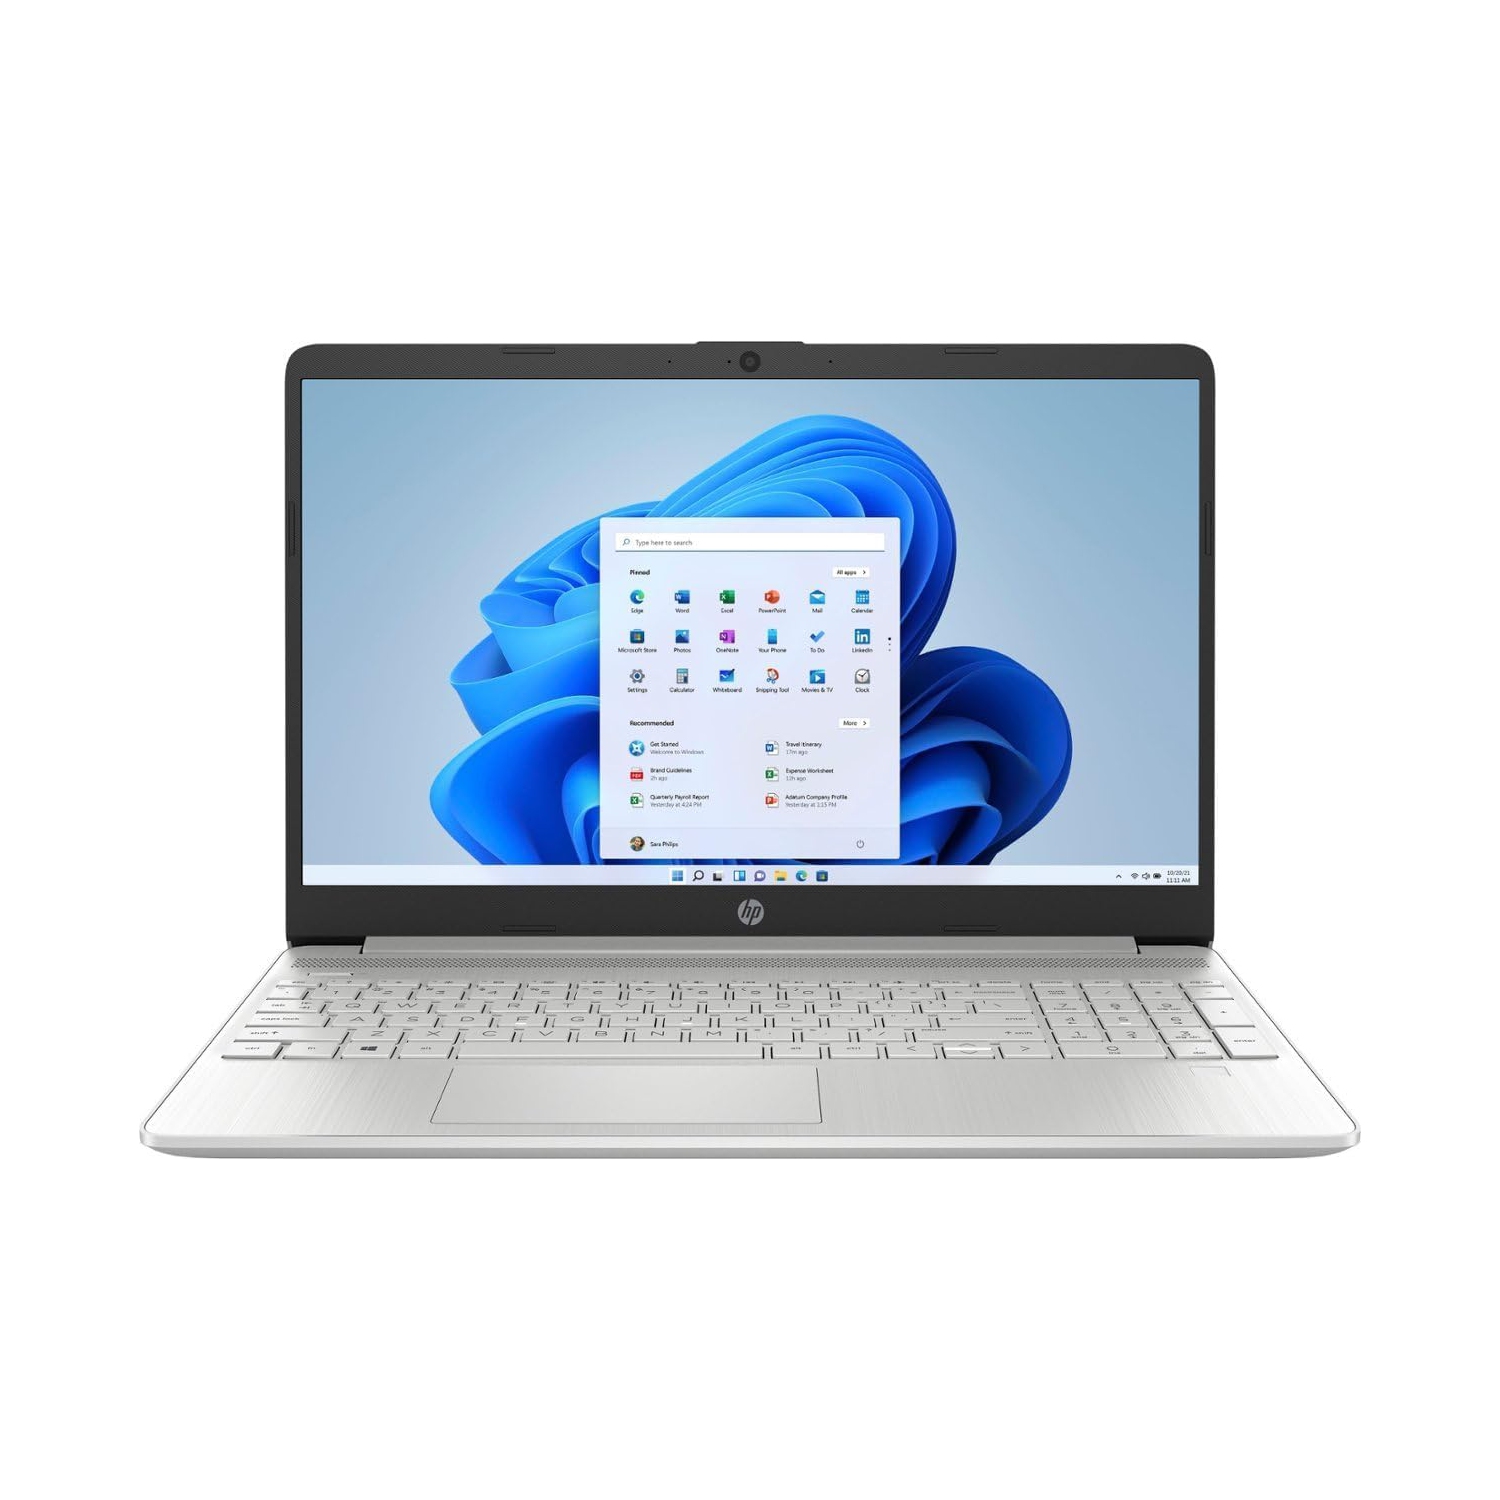 HP - 15.6" Touch-Screen Laptop - Intel Core 6-Core i3 -1215u Up to 4.4GHz - 16GB Memory - 512GB SSD - Natural Silver, Intel UHD Graphics, Fingerprint Reader, Windows 11 Home